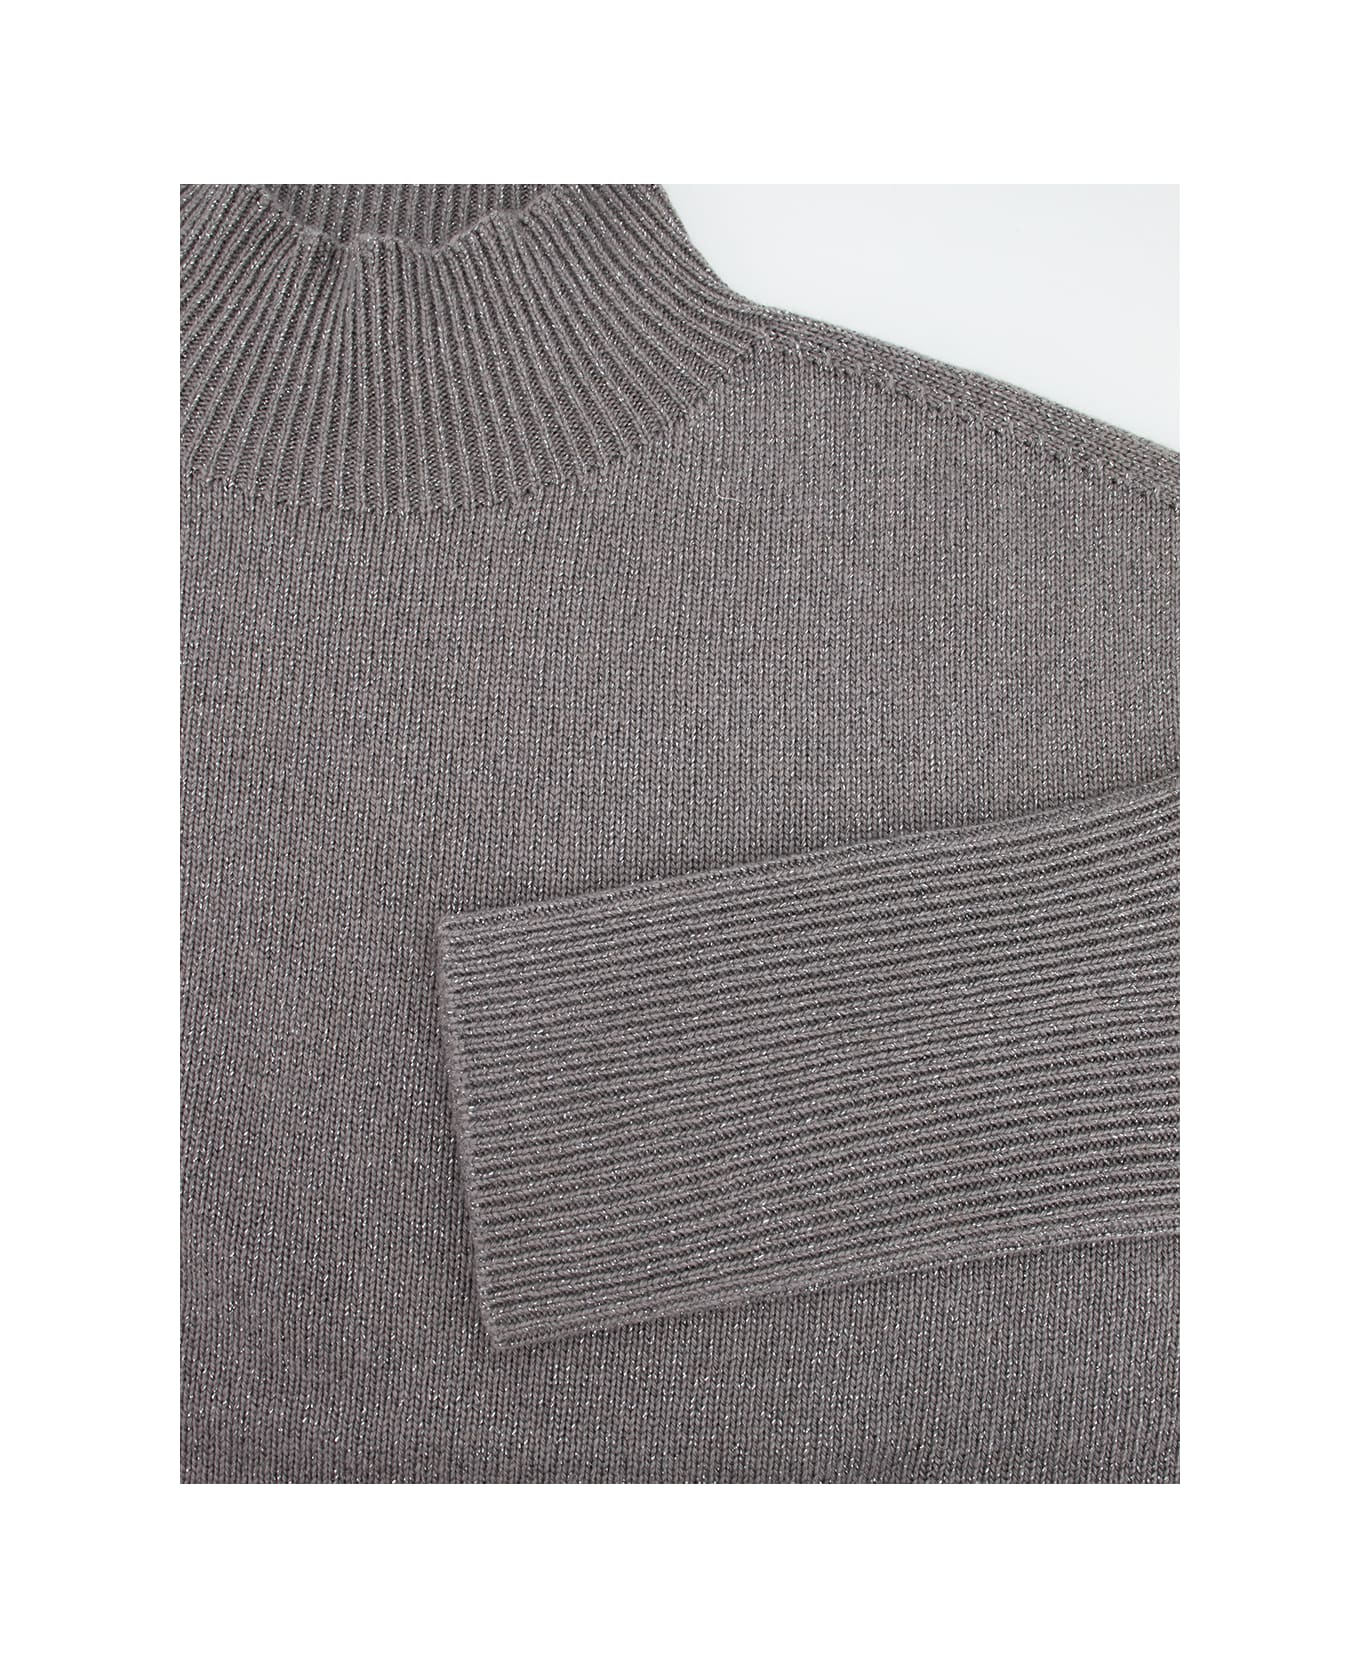 Le Tricot Perugia Sweater - TAUPE/GREY LX ニットウェア